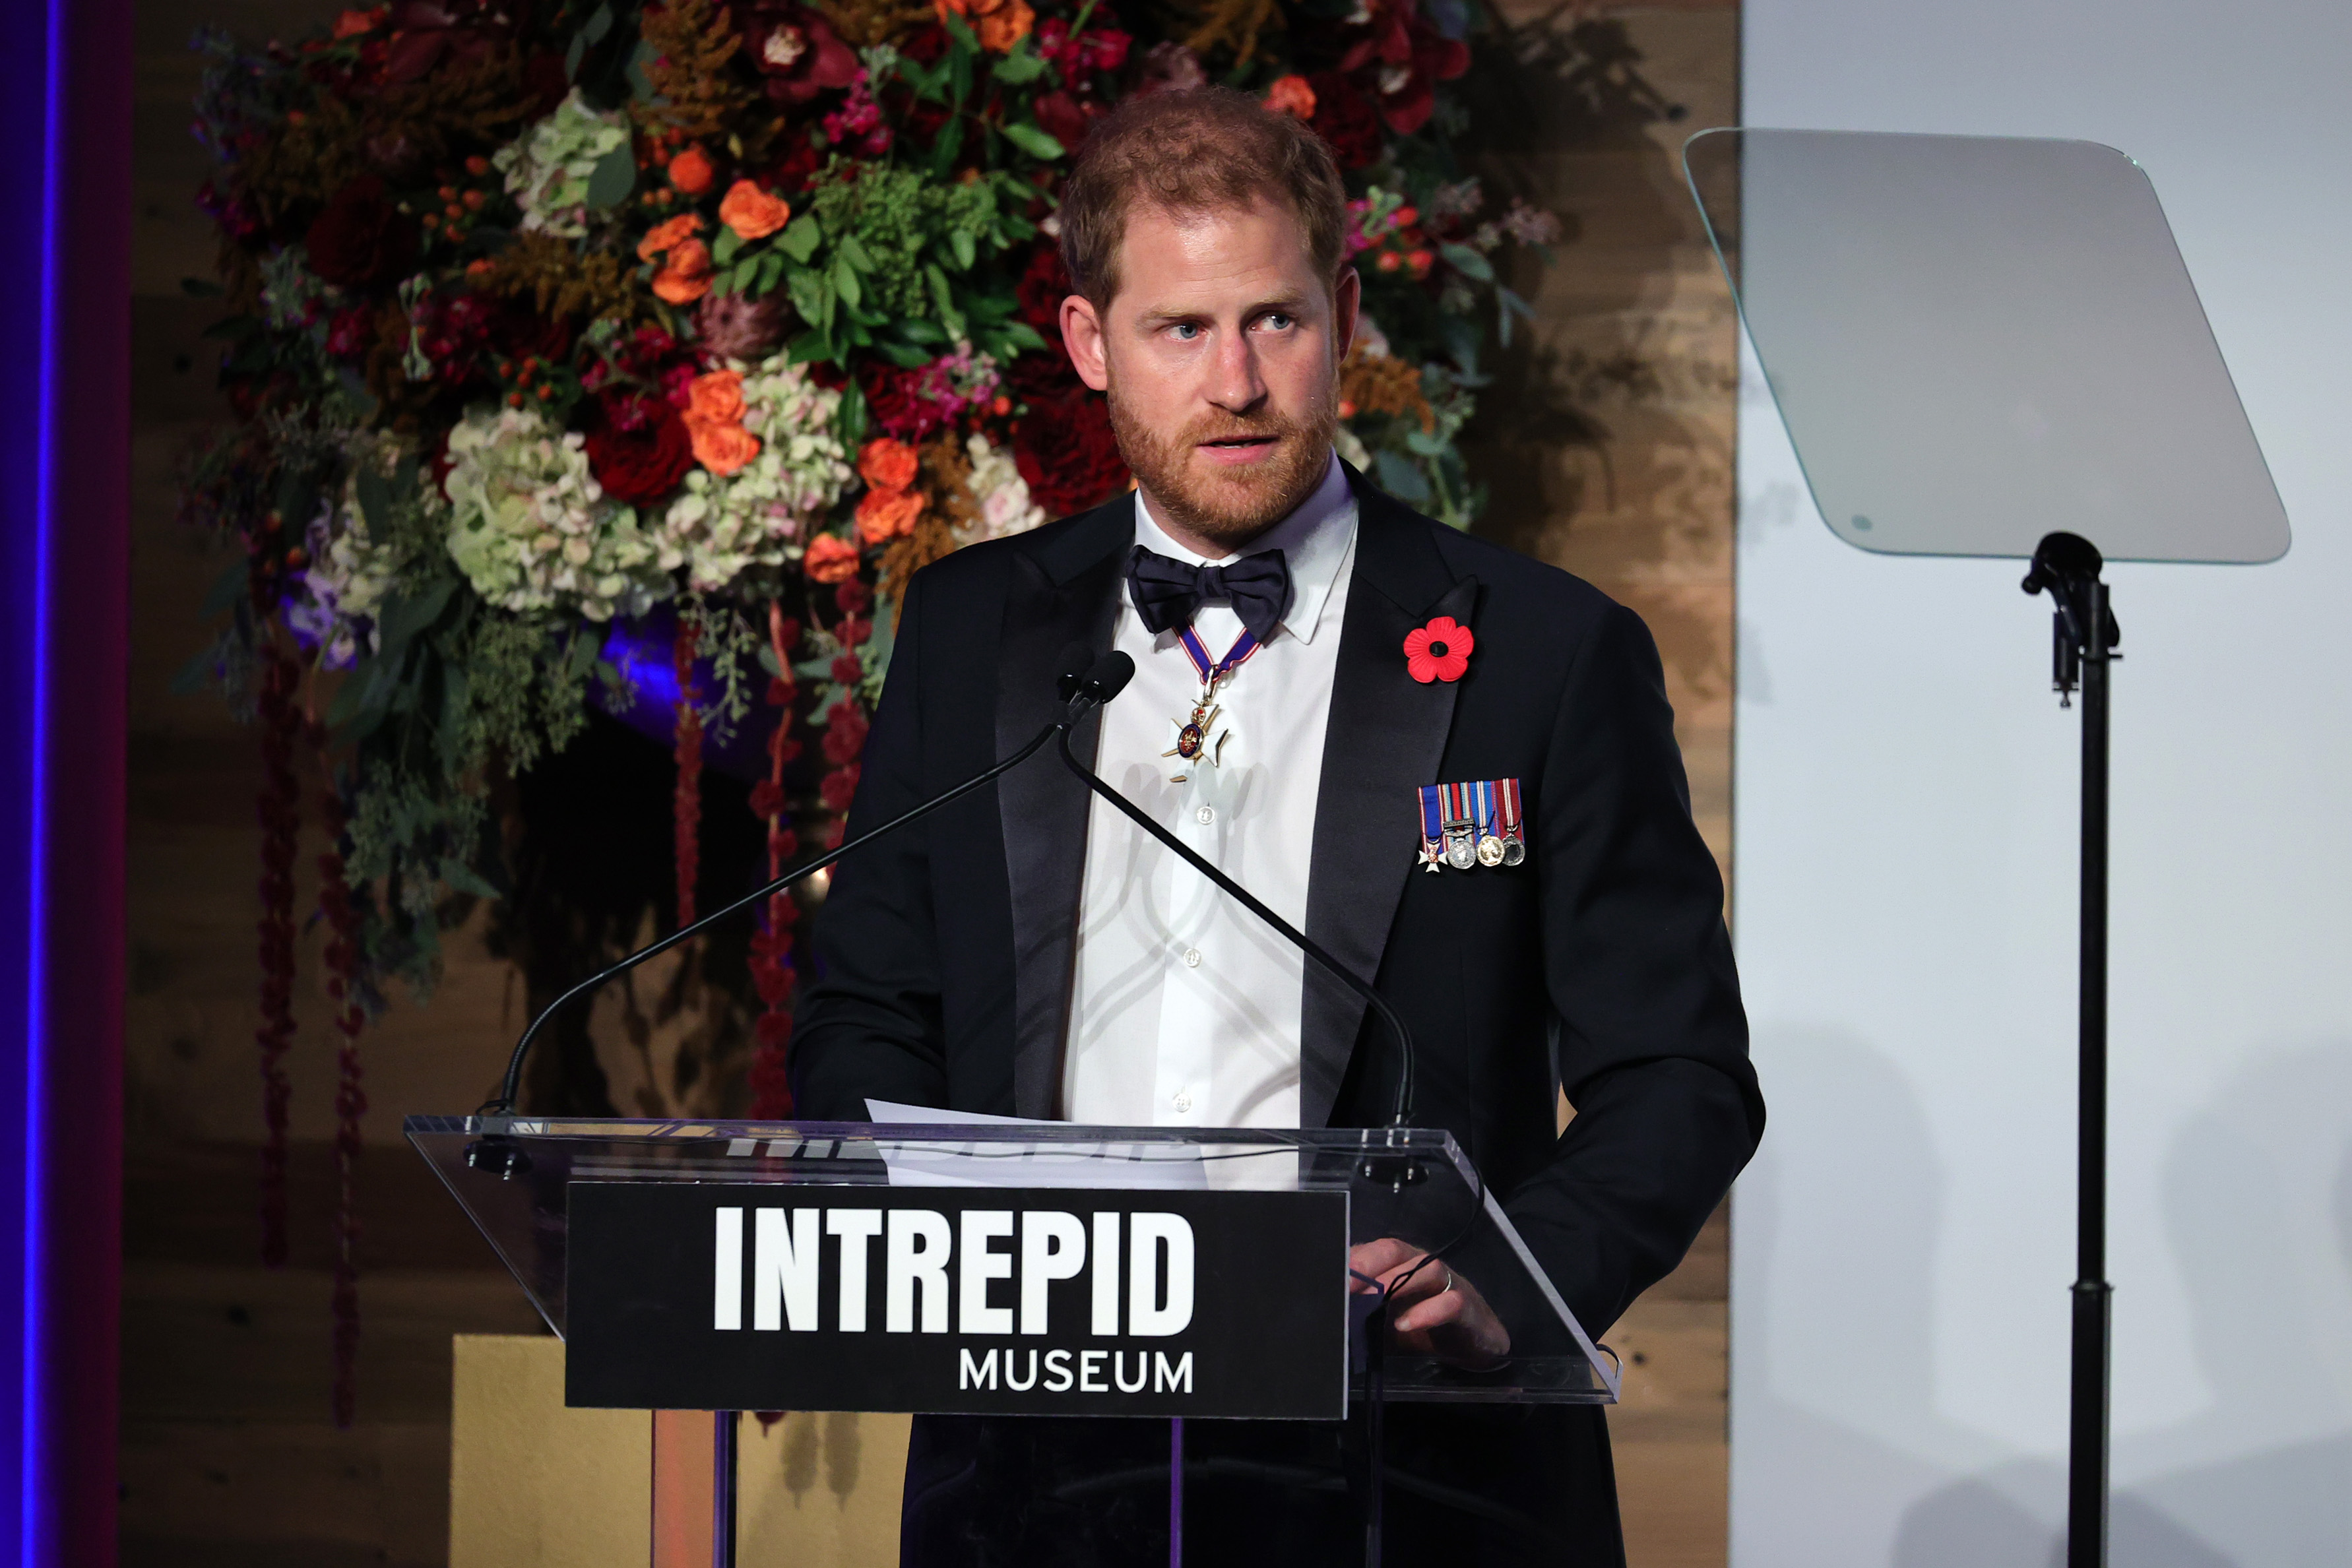 Prince Harry dressed in a tuxedo and speaking on stage at the Intrepid Museum